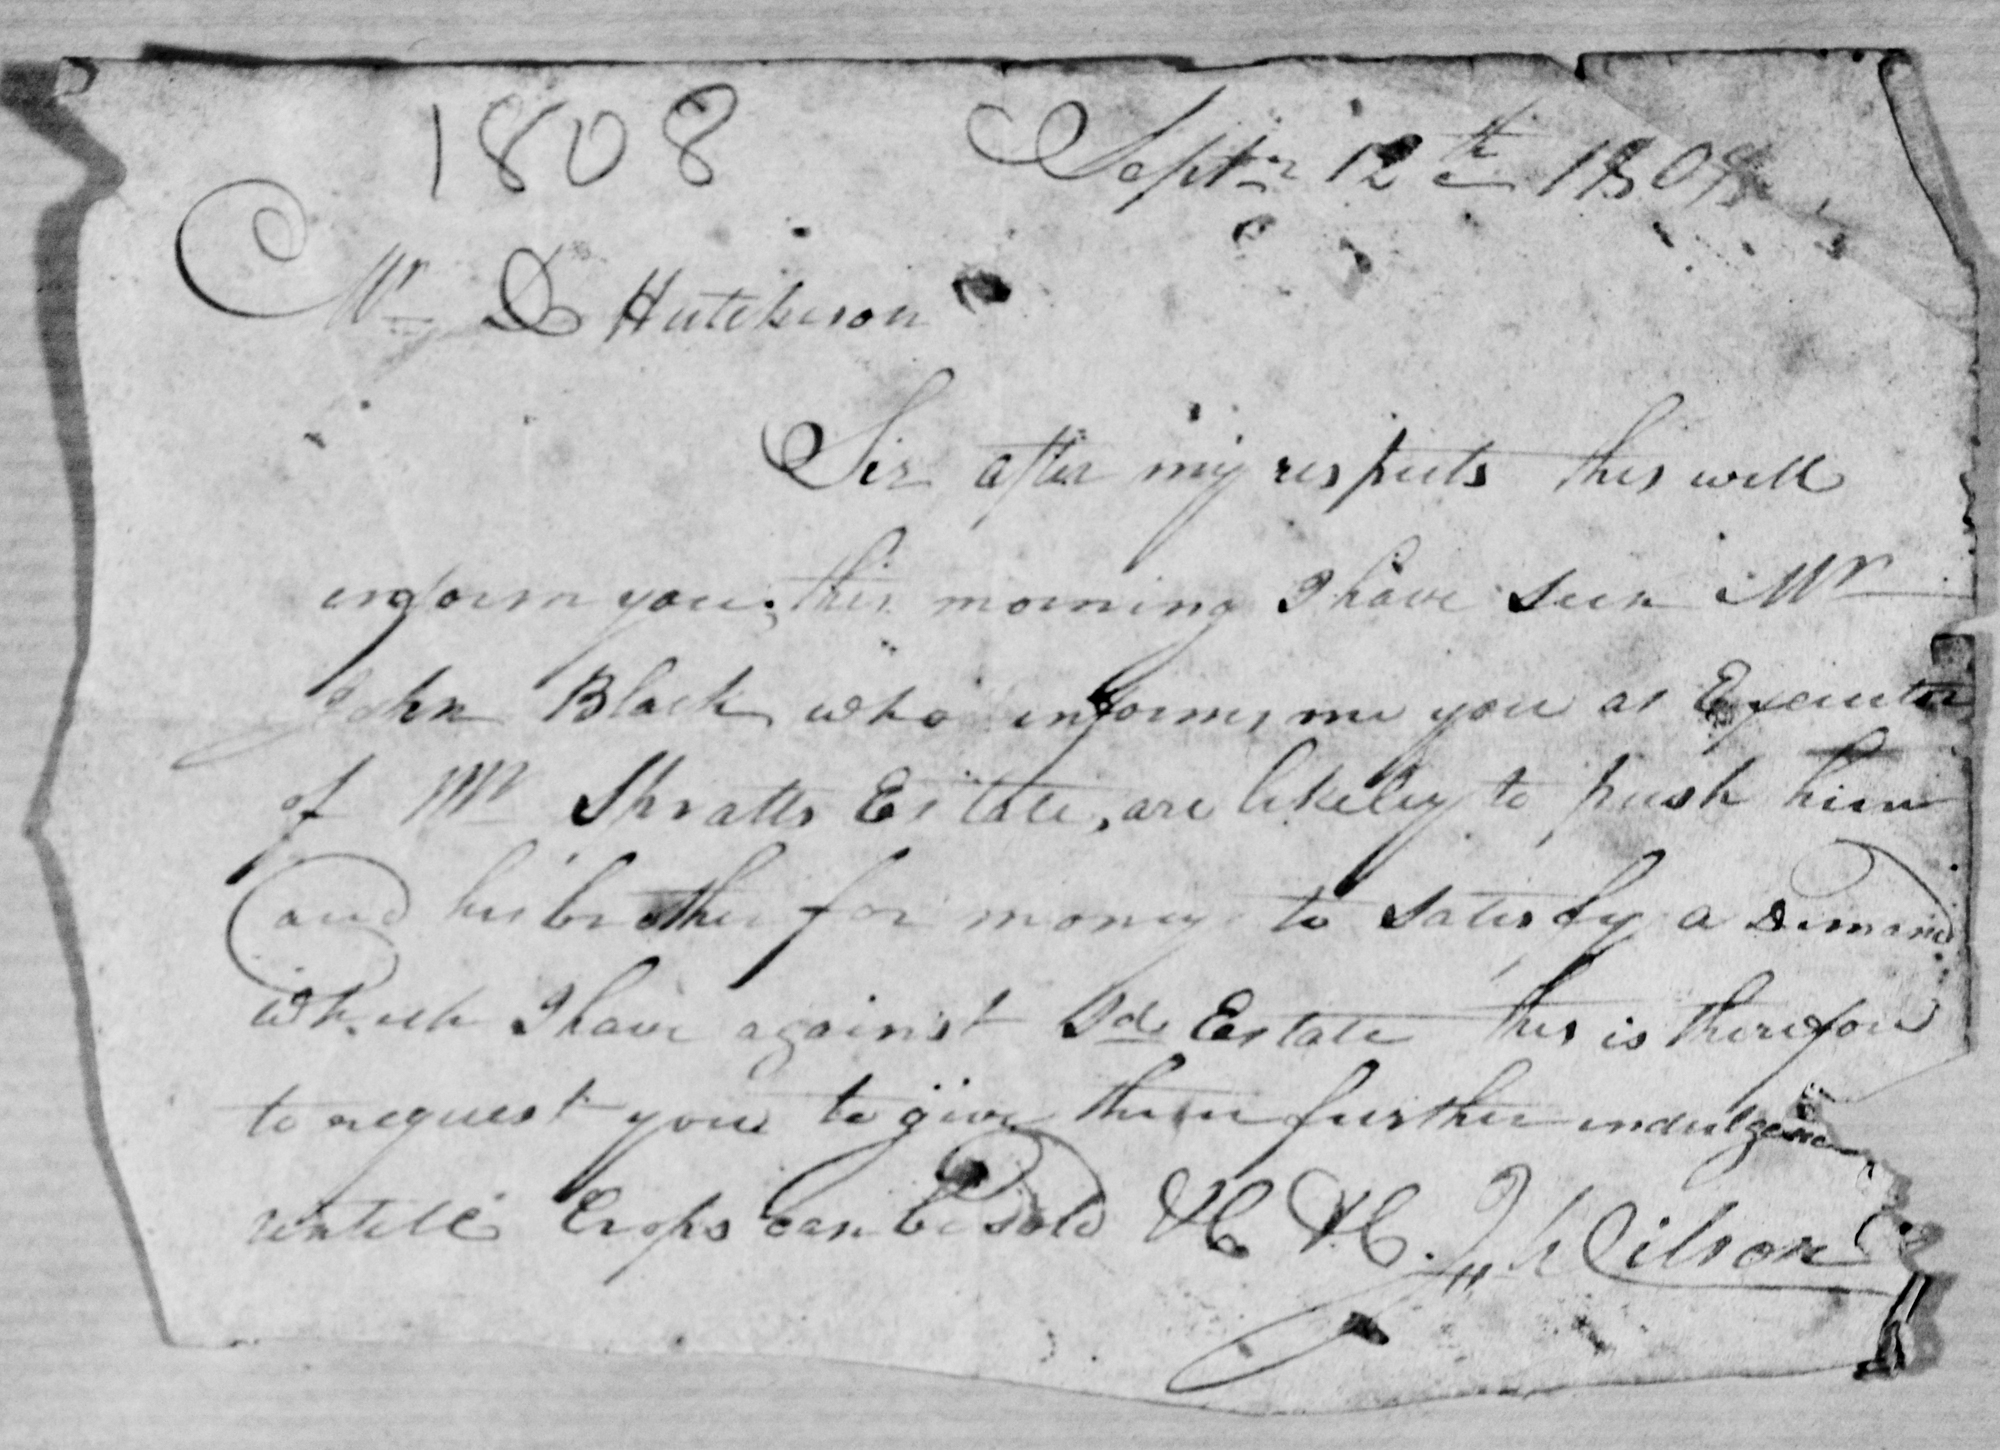 H.H. Wilson owes the Spratt Estate and offers to pay when crops sold, Sept. 12, 1808